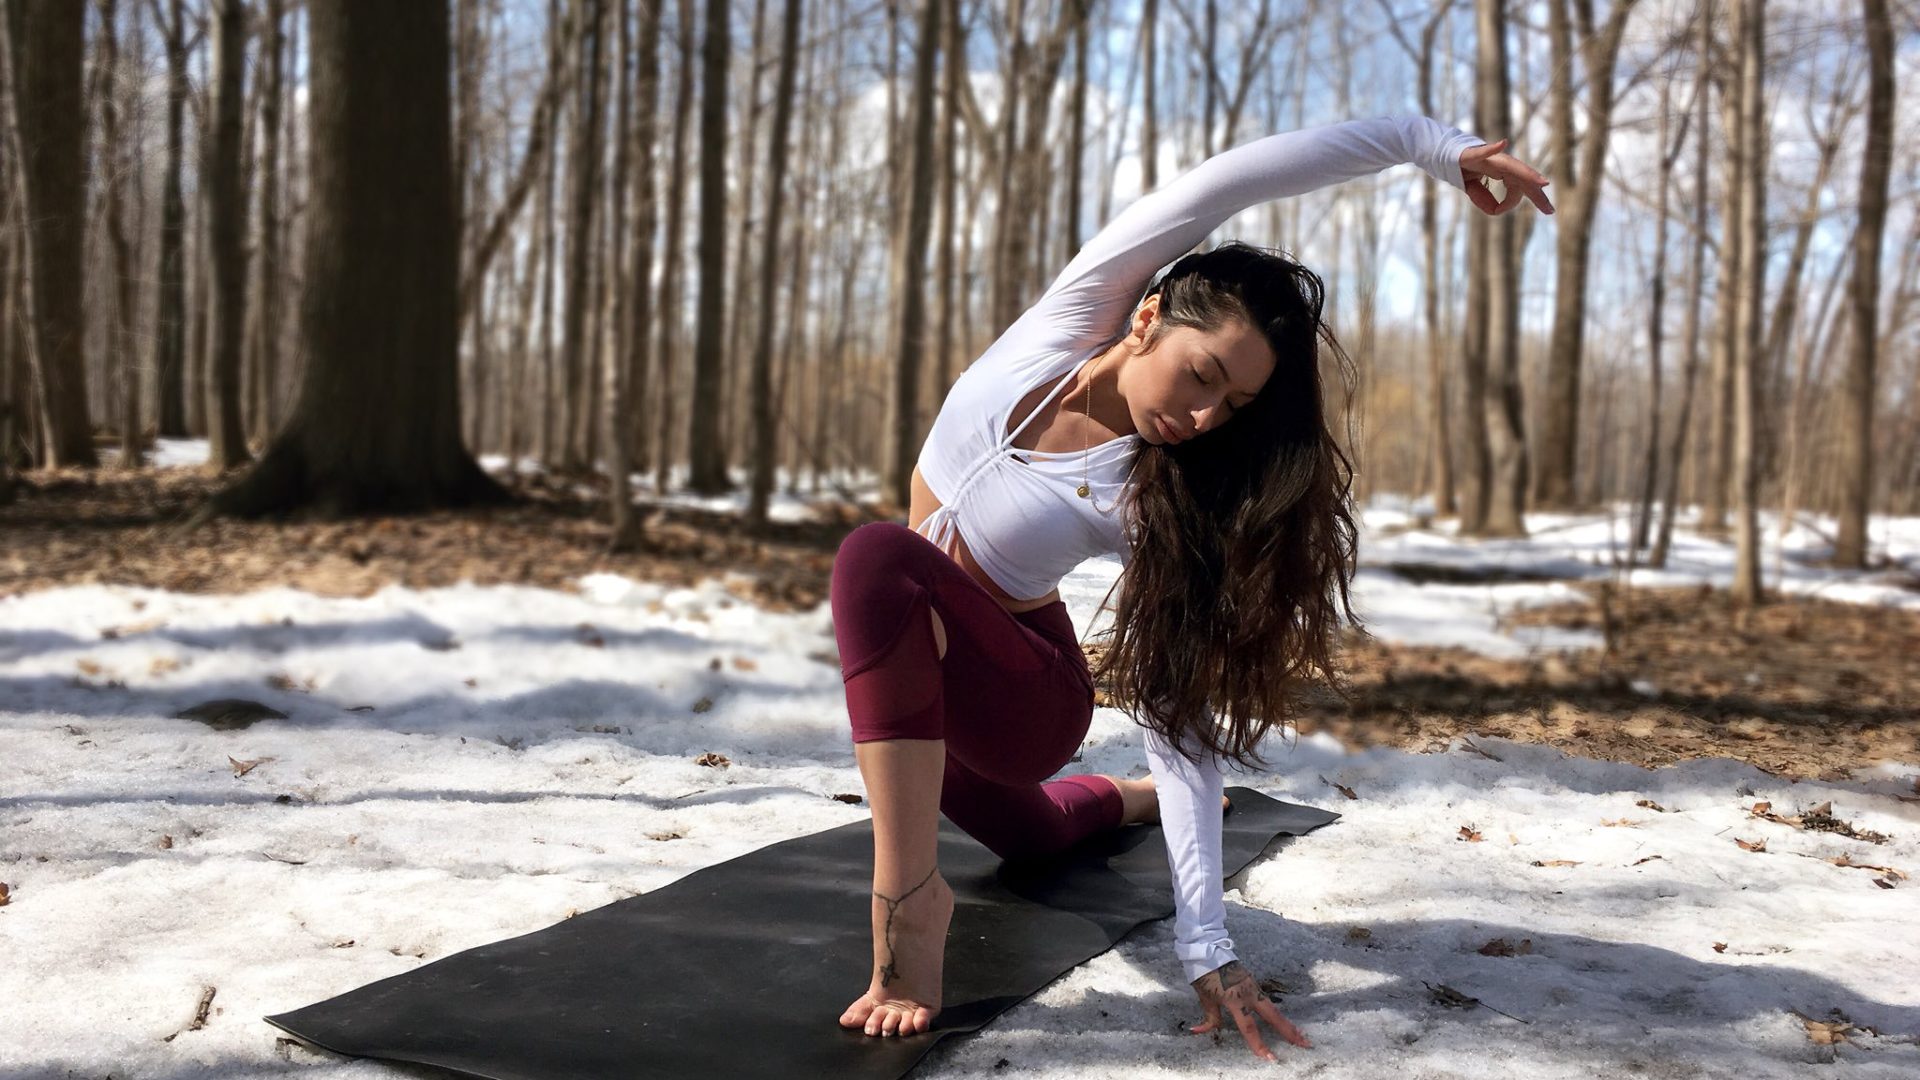 Connect with Cami Be Yoga - Birdsong If you find your attention